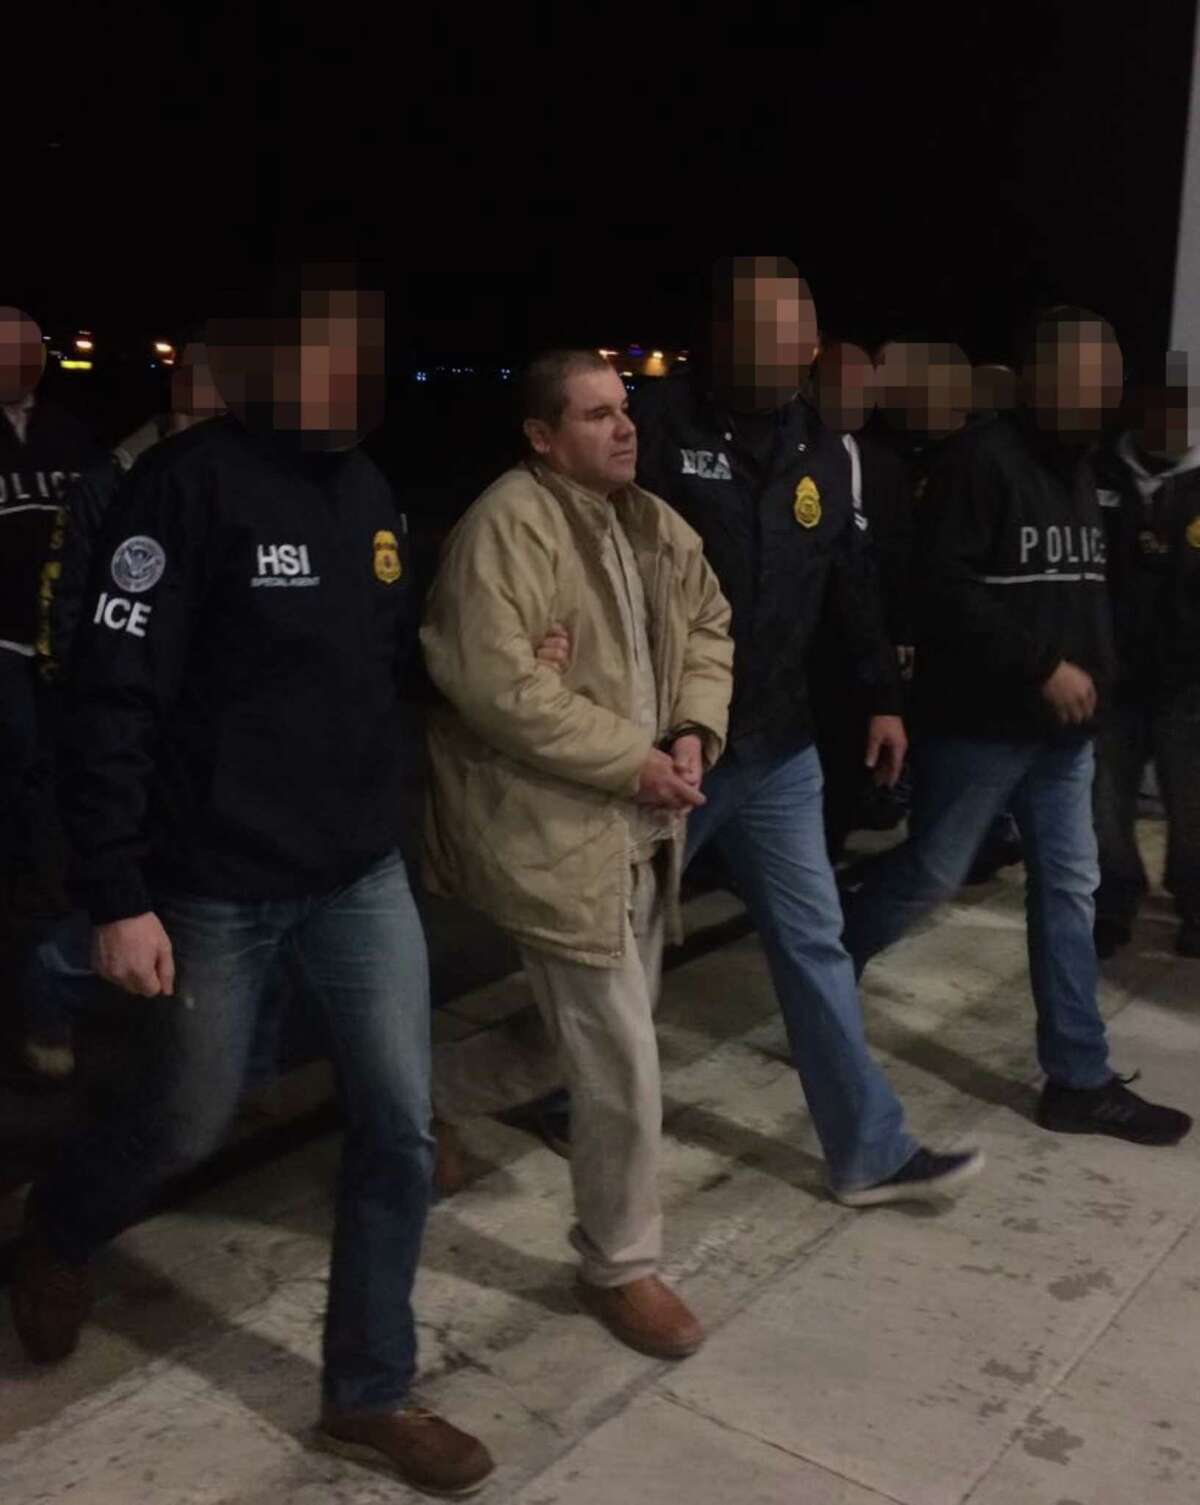 "El Chapo" Guzman is escorted by U.S. Immigration and Customs Enforcement personnel as he is extradited to the U.S. on Thursday. The ICE agents' faces were blurred intentionally.